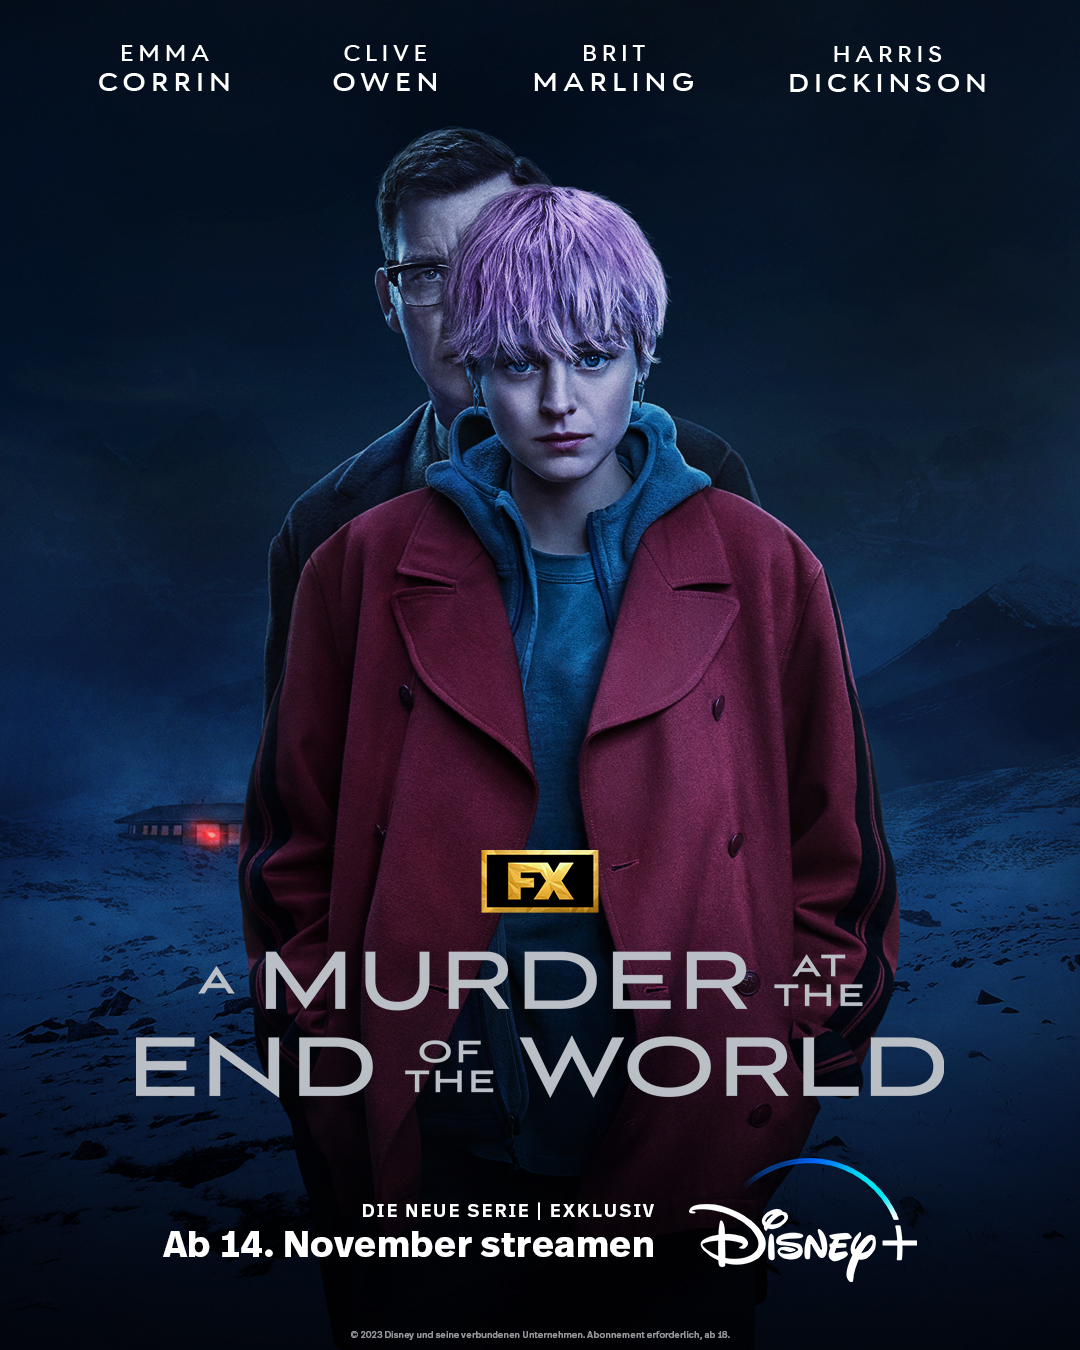 Poster der Mystery-Murder-Serie A Murder at the End of the World.